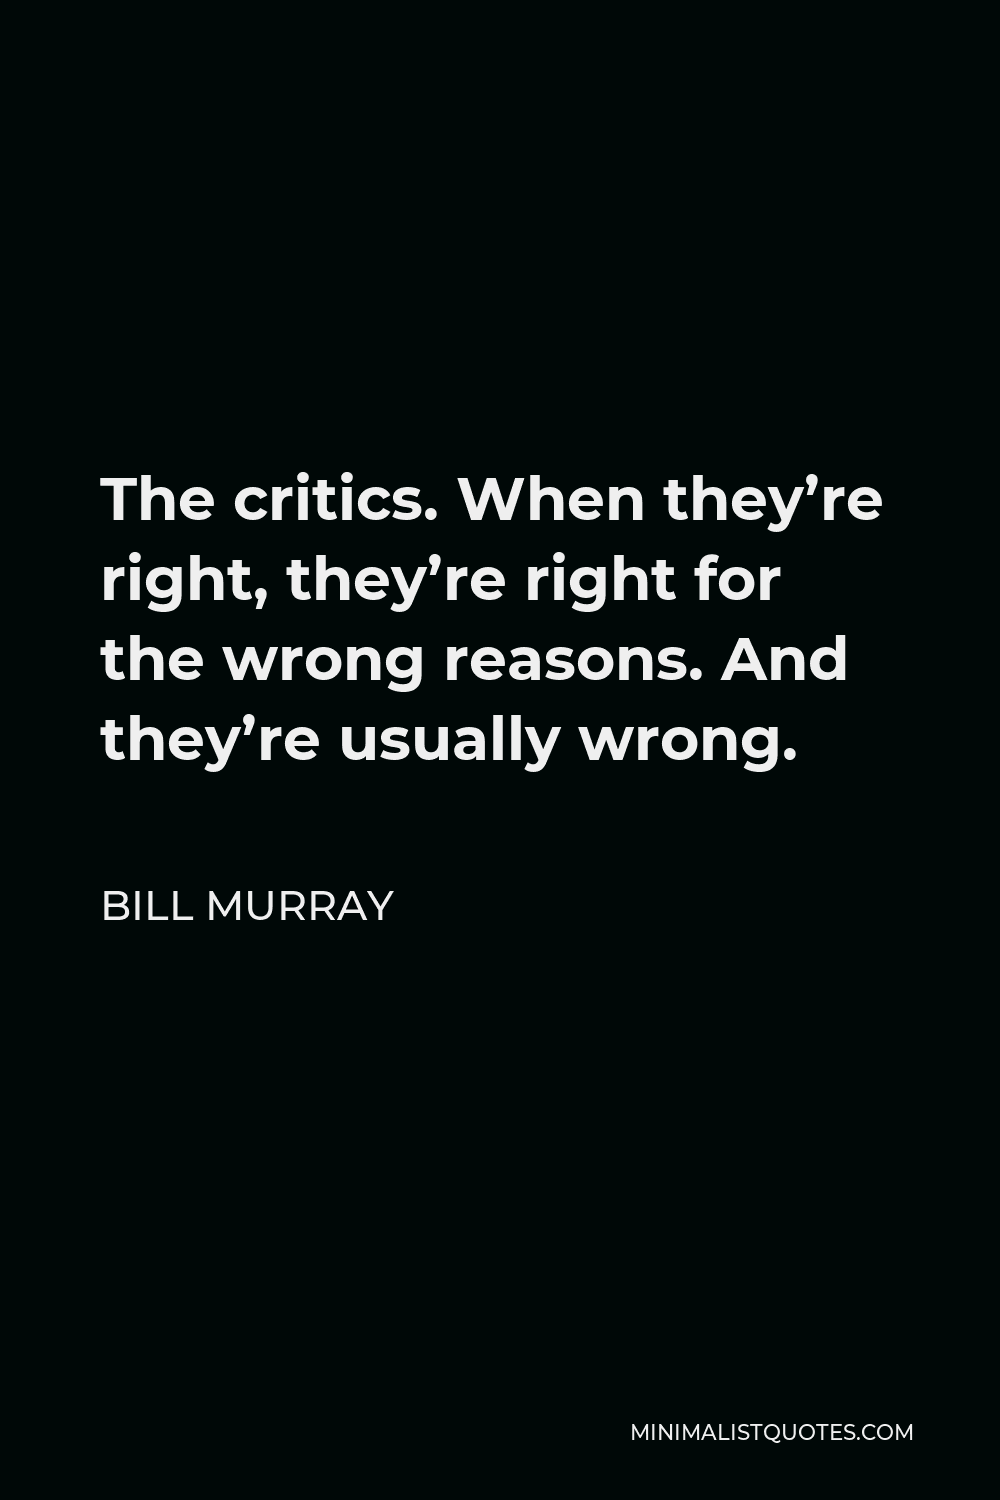 Bill Murray Quote - The critics. When they’re right, they’re right for the wrong reasons. And they’re usually wrong.